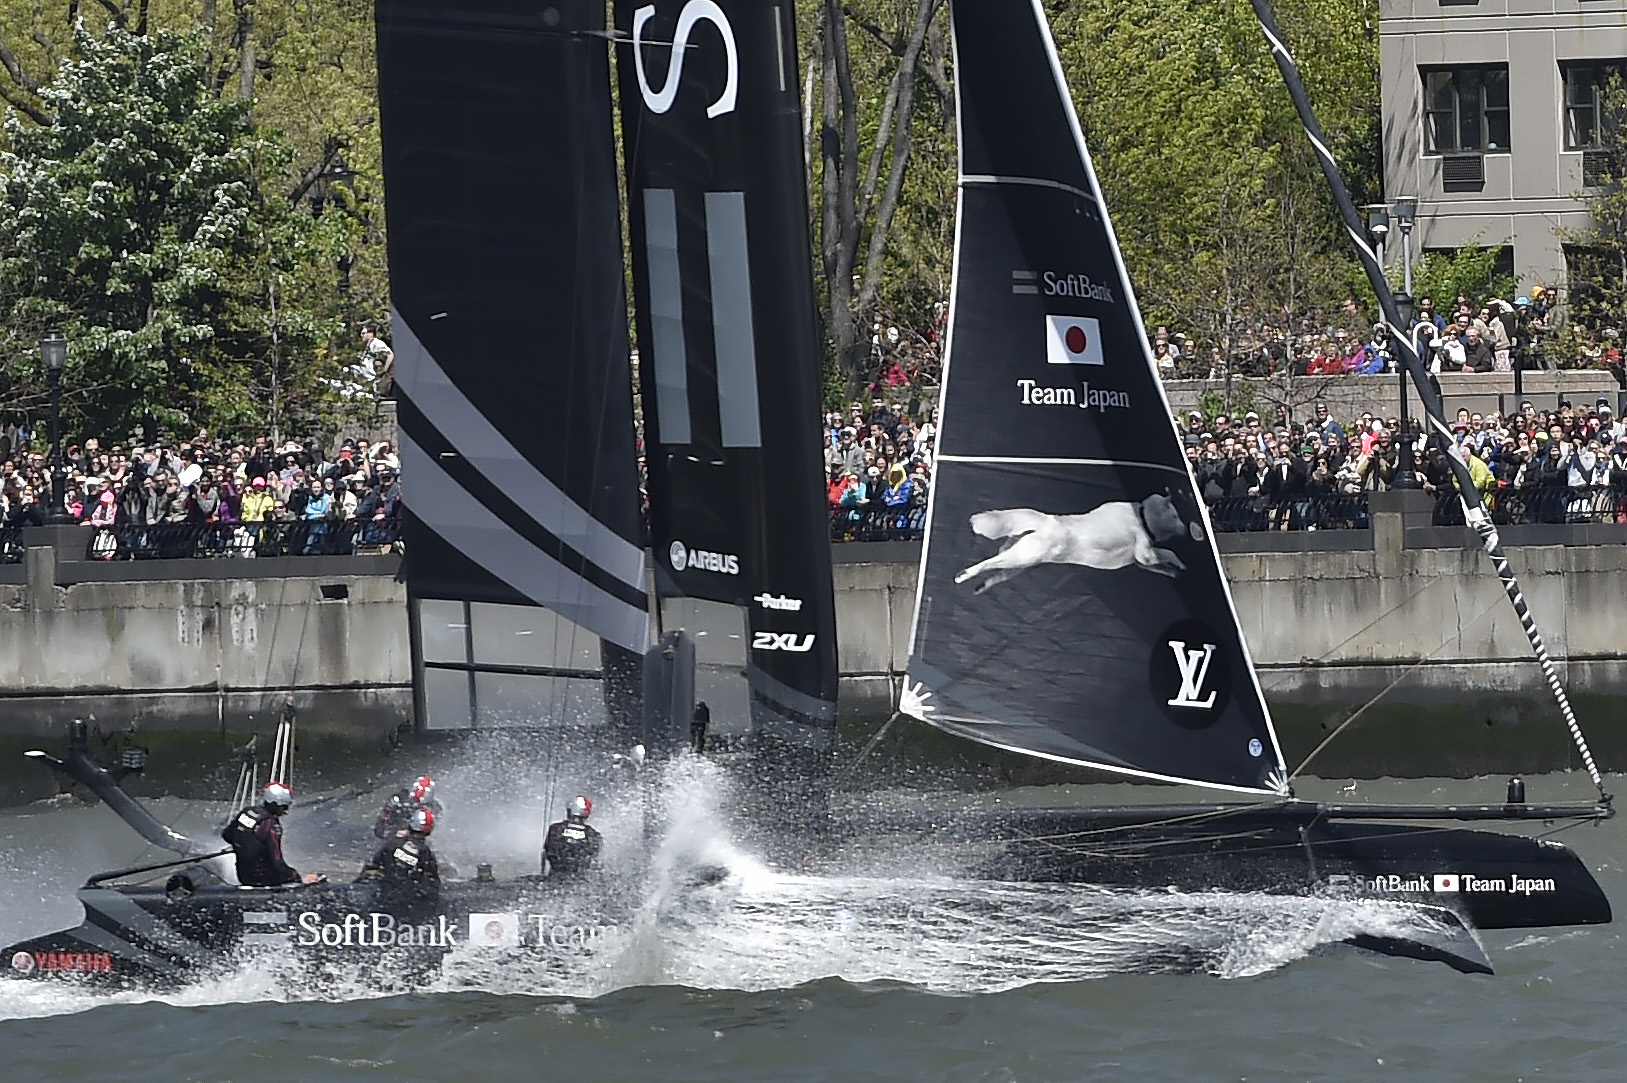 Spectators in Battery Park watch Softbank Team Japan crash through a wave during a Louis Vuitton America's Cup World Series preliminary race in New York City. Photo by David Tulis.                                                                                                 